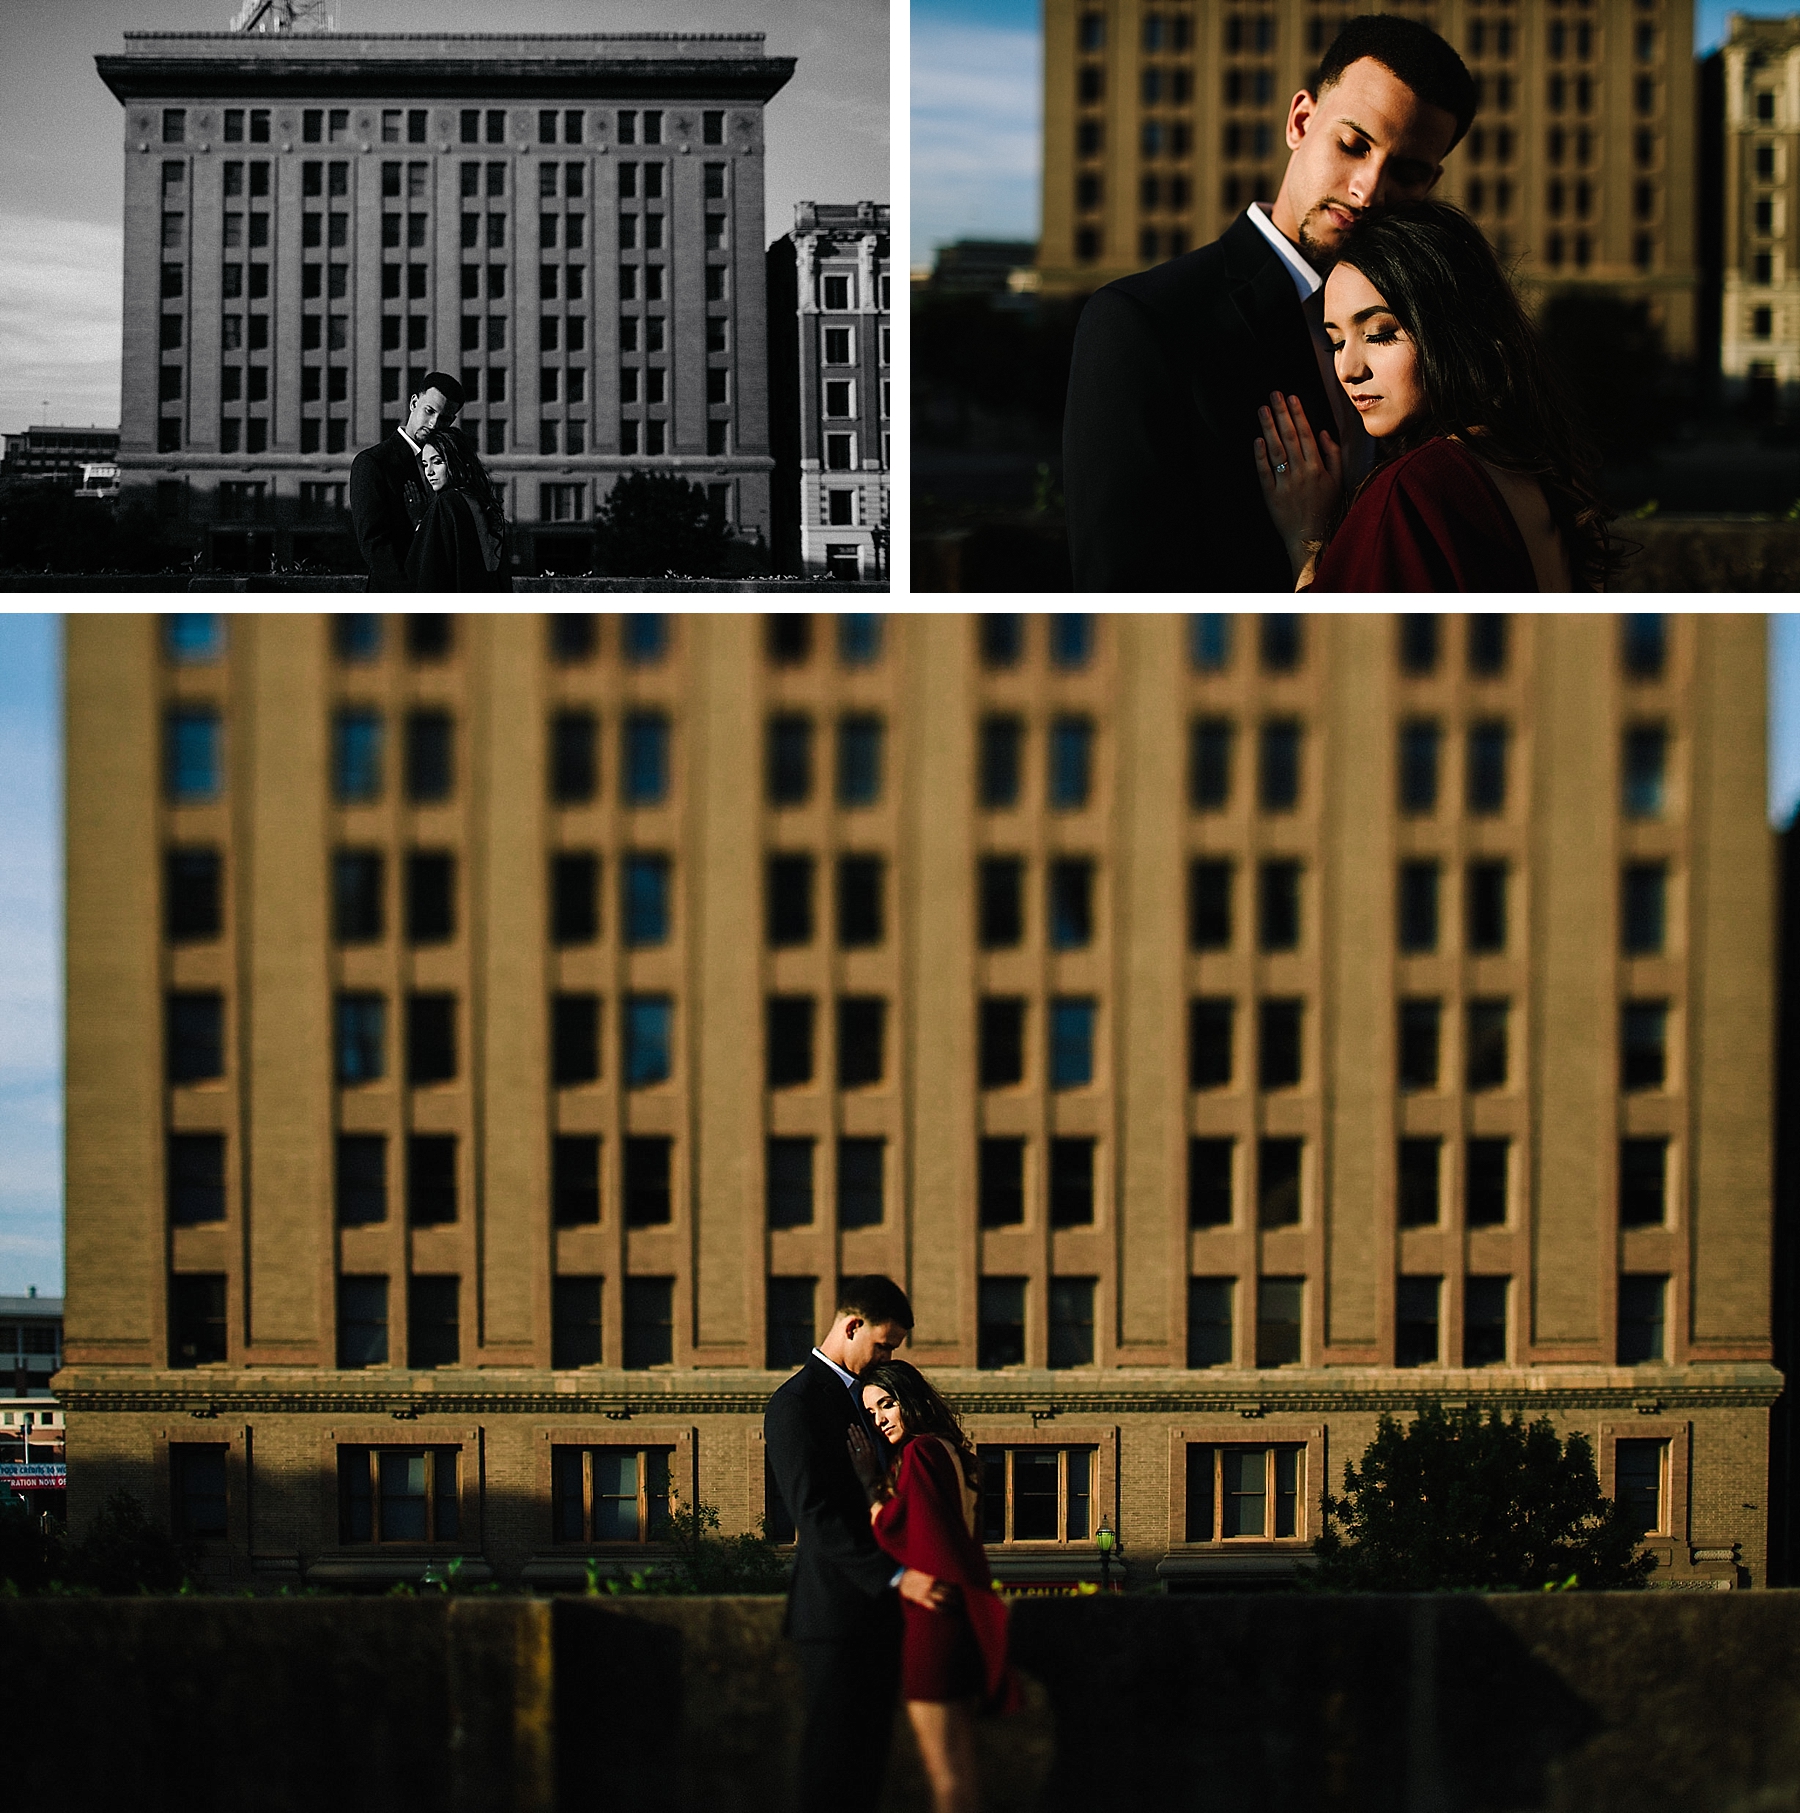 Lina & Nick's at home engagement session in downtown Houston, Texas